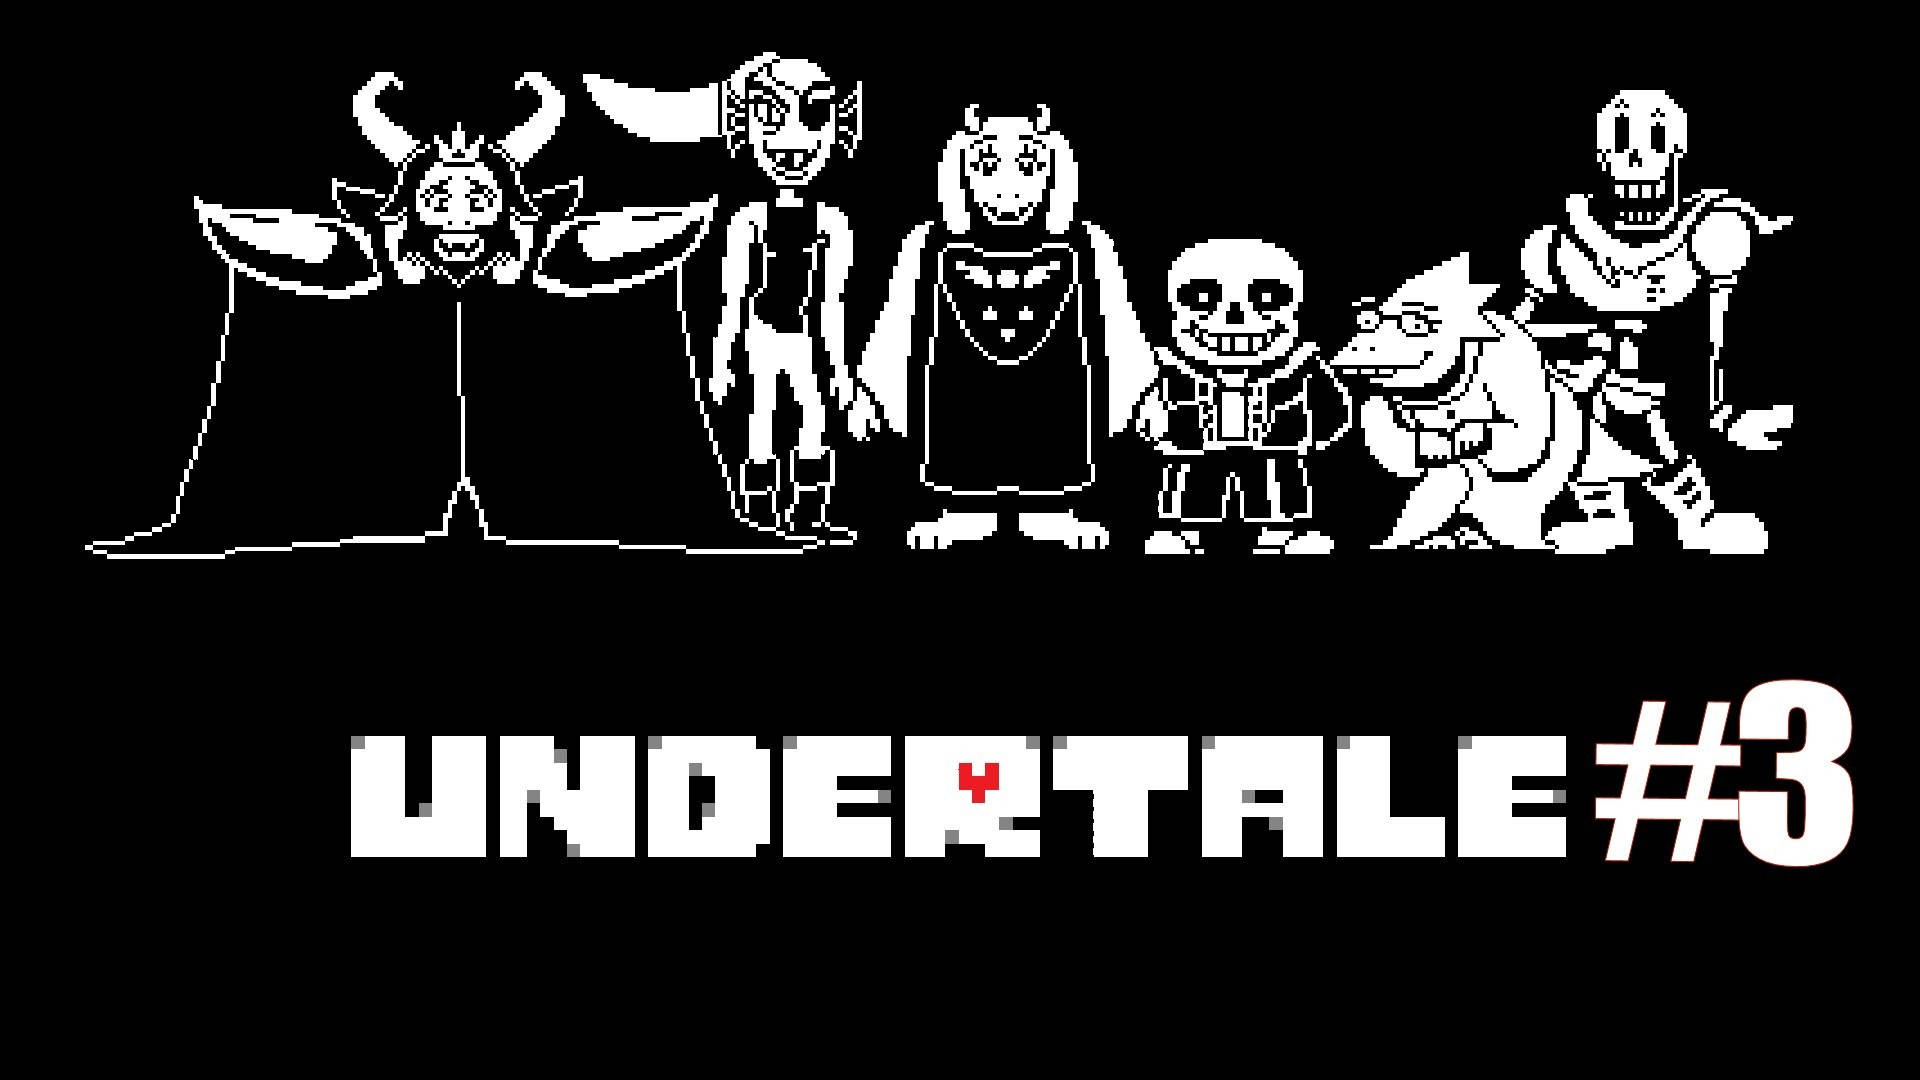 Sans 1920X1080 Wallpaper and Background Image